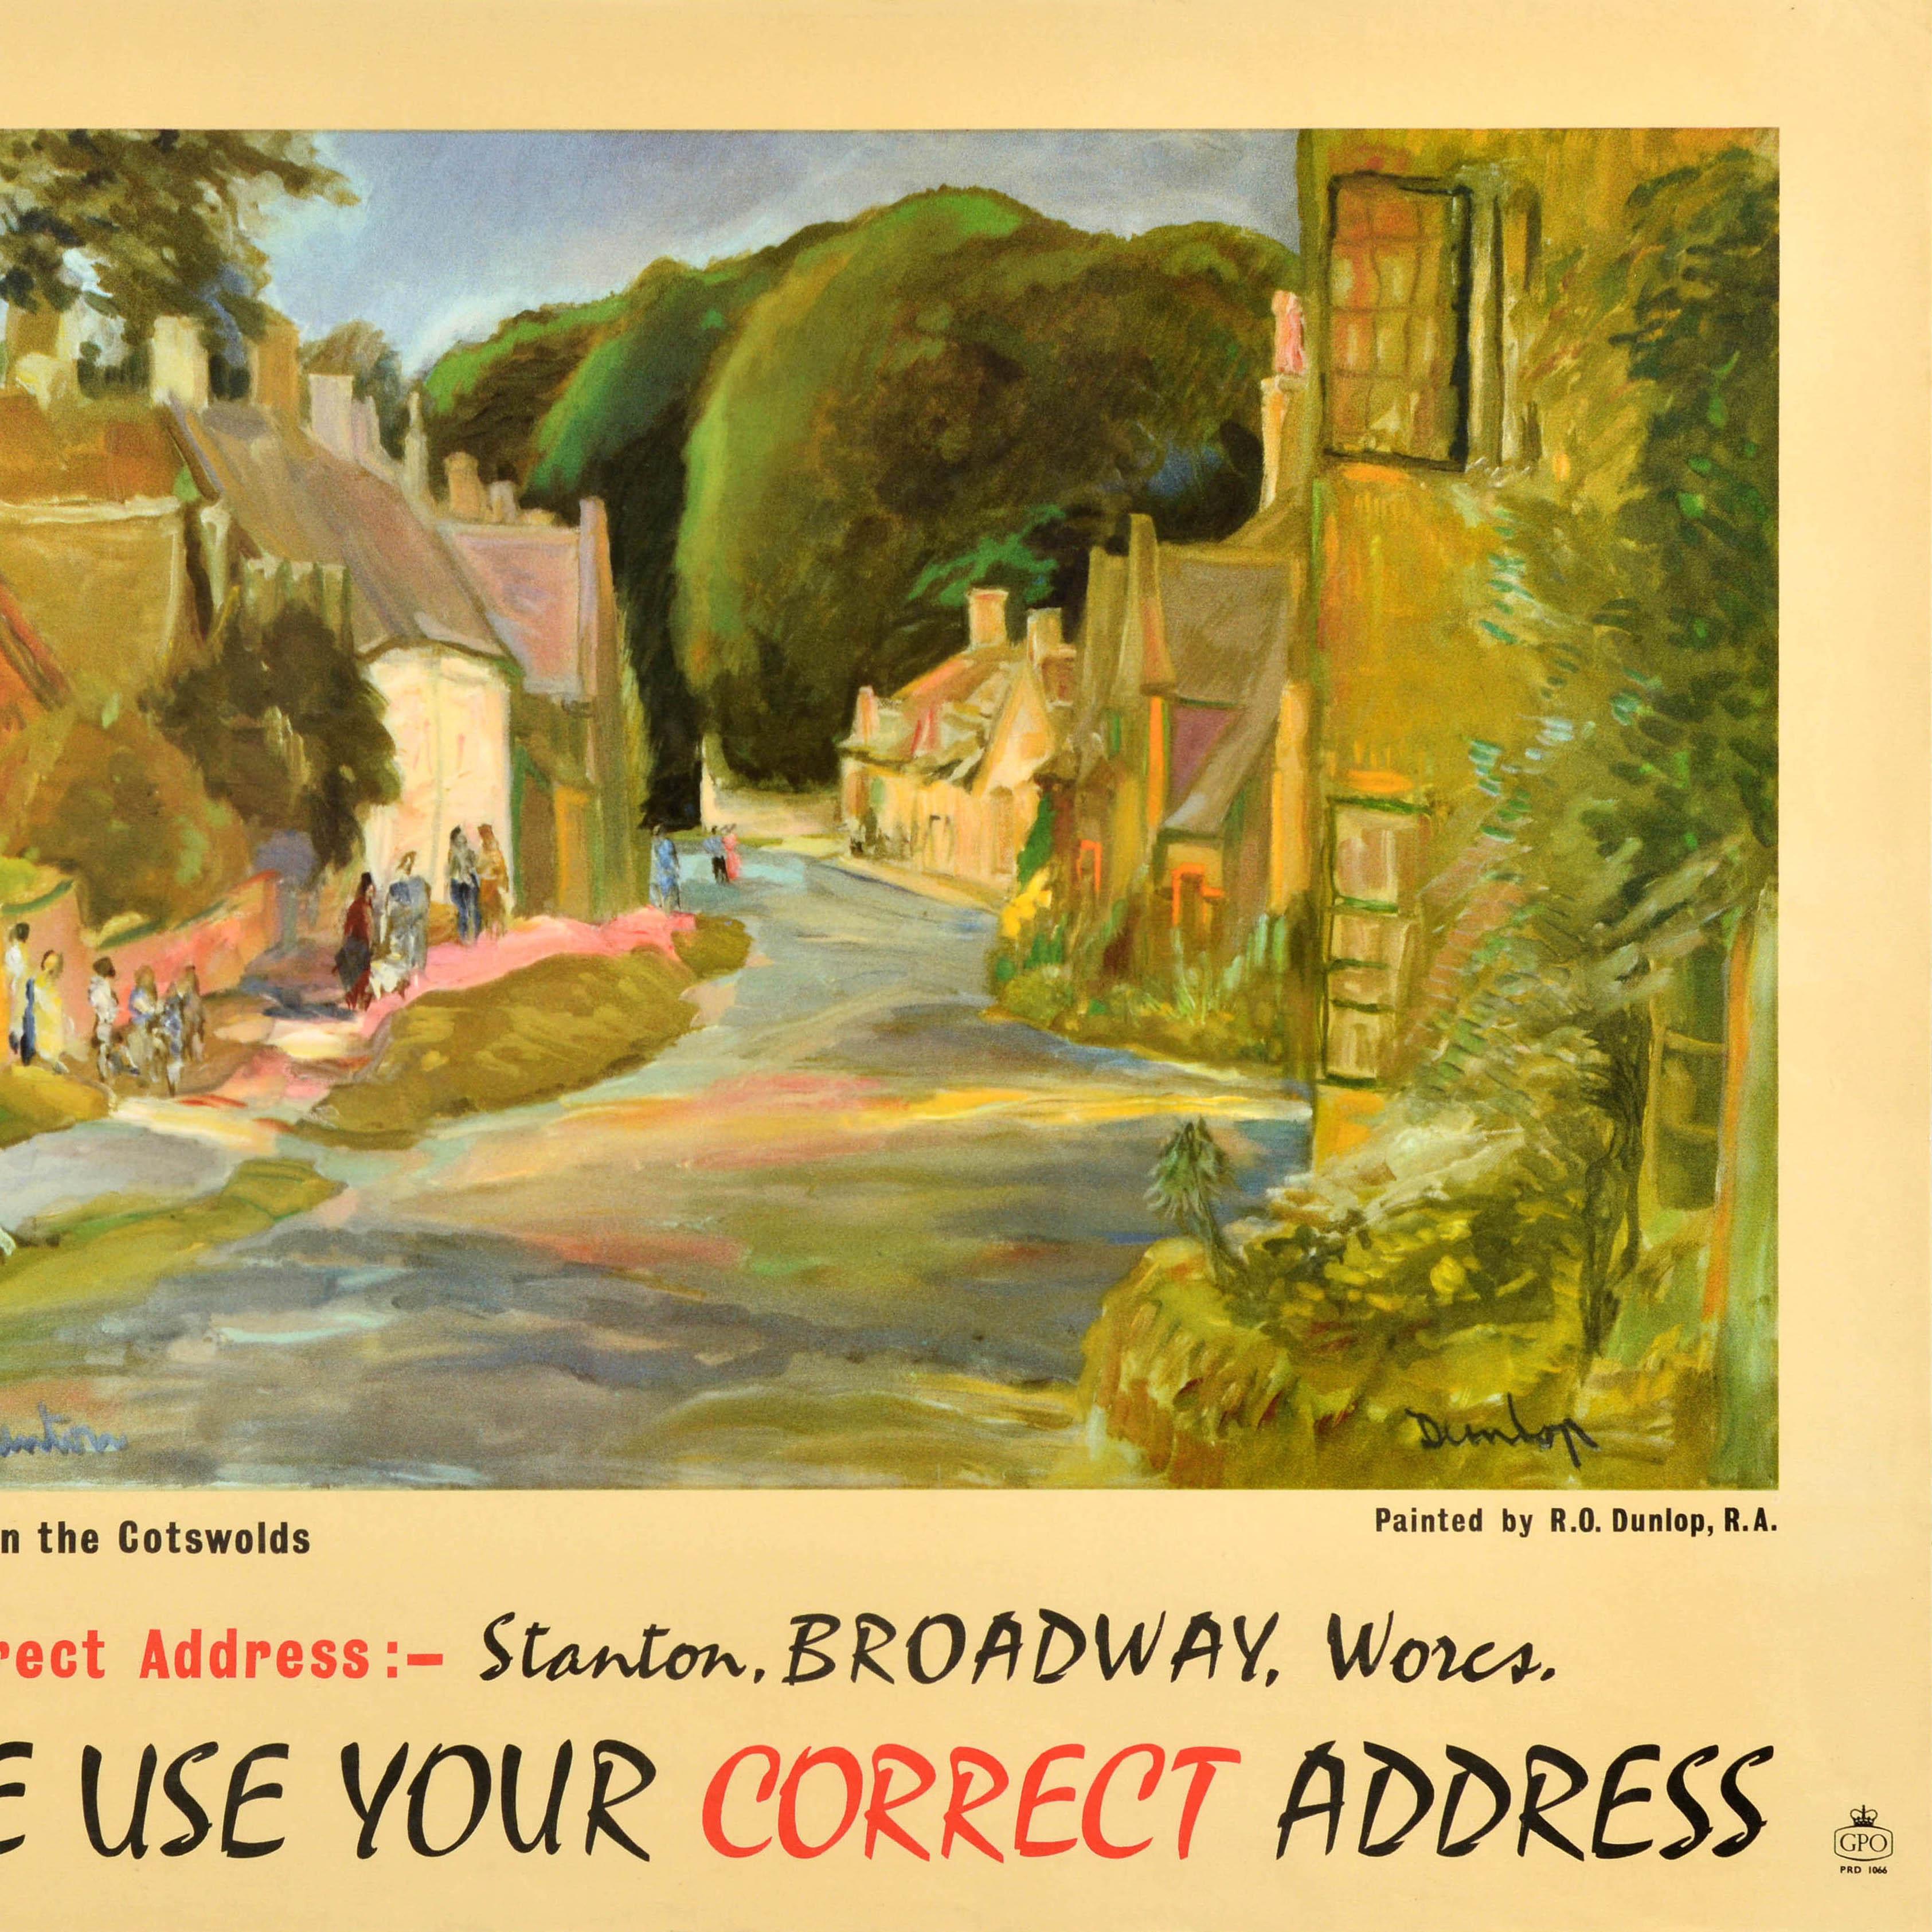 Original vintage General Post Office poster - This is Stanton in the Cotswolds Correct Address: Stanton, Broadway, Wores Please use your correct address - featuring a colourful picturesque village view by the Irish writer and painter Ronald Ossory